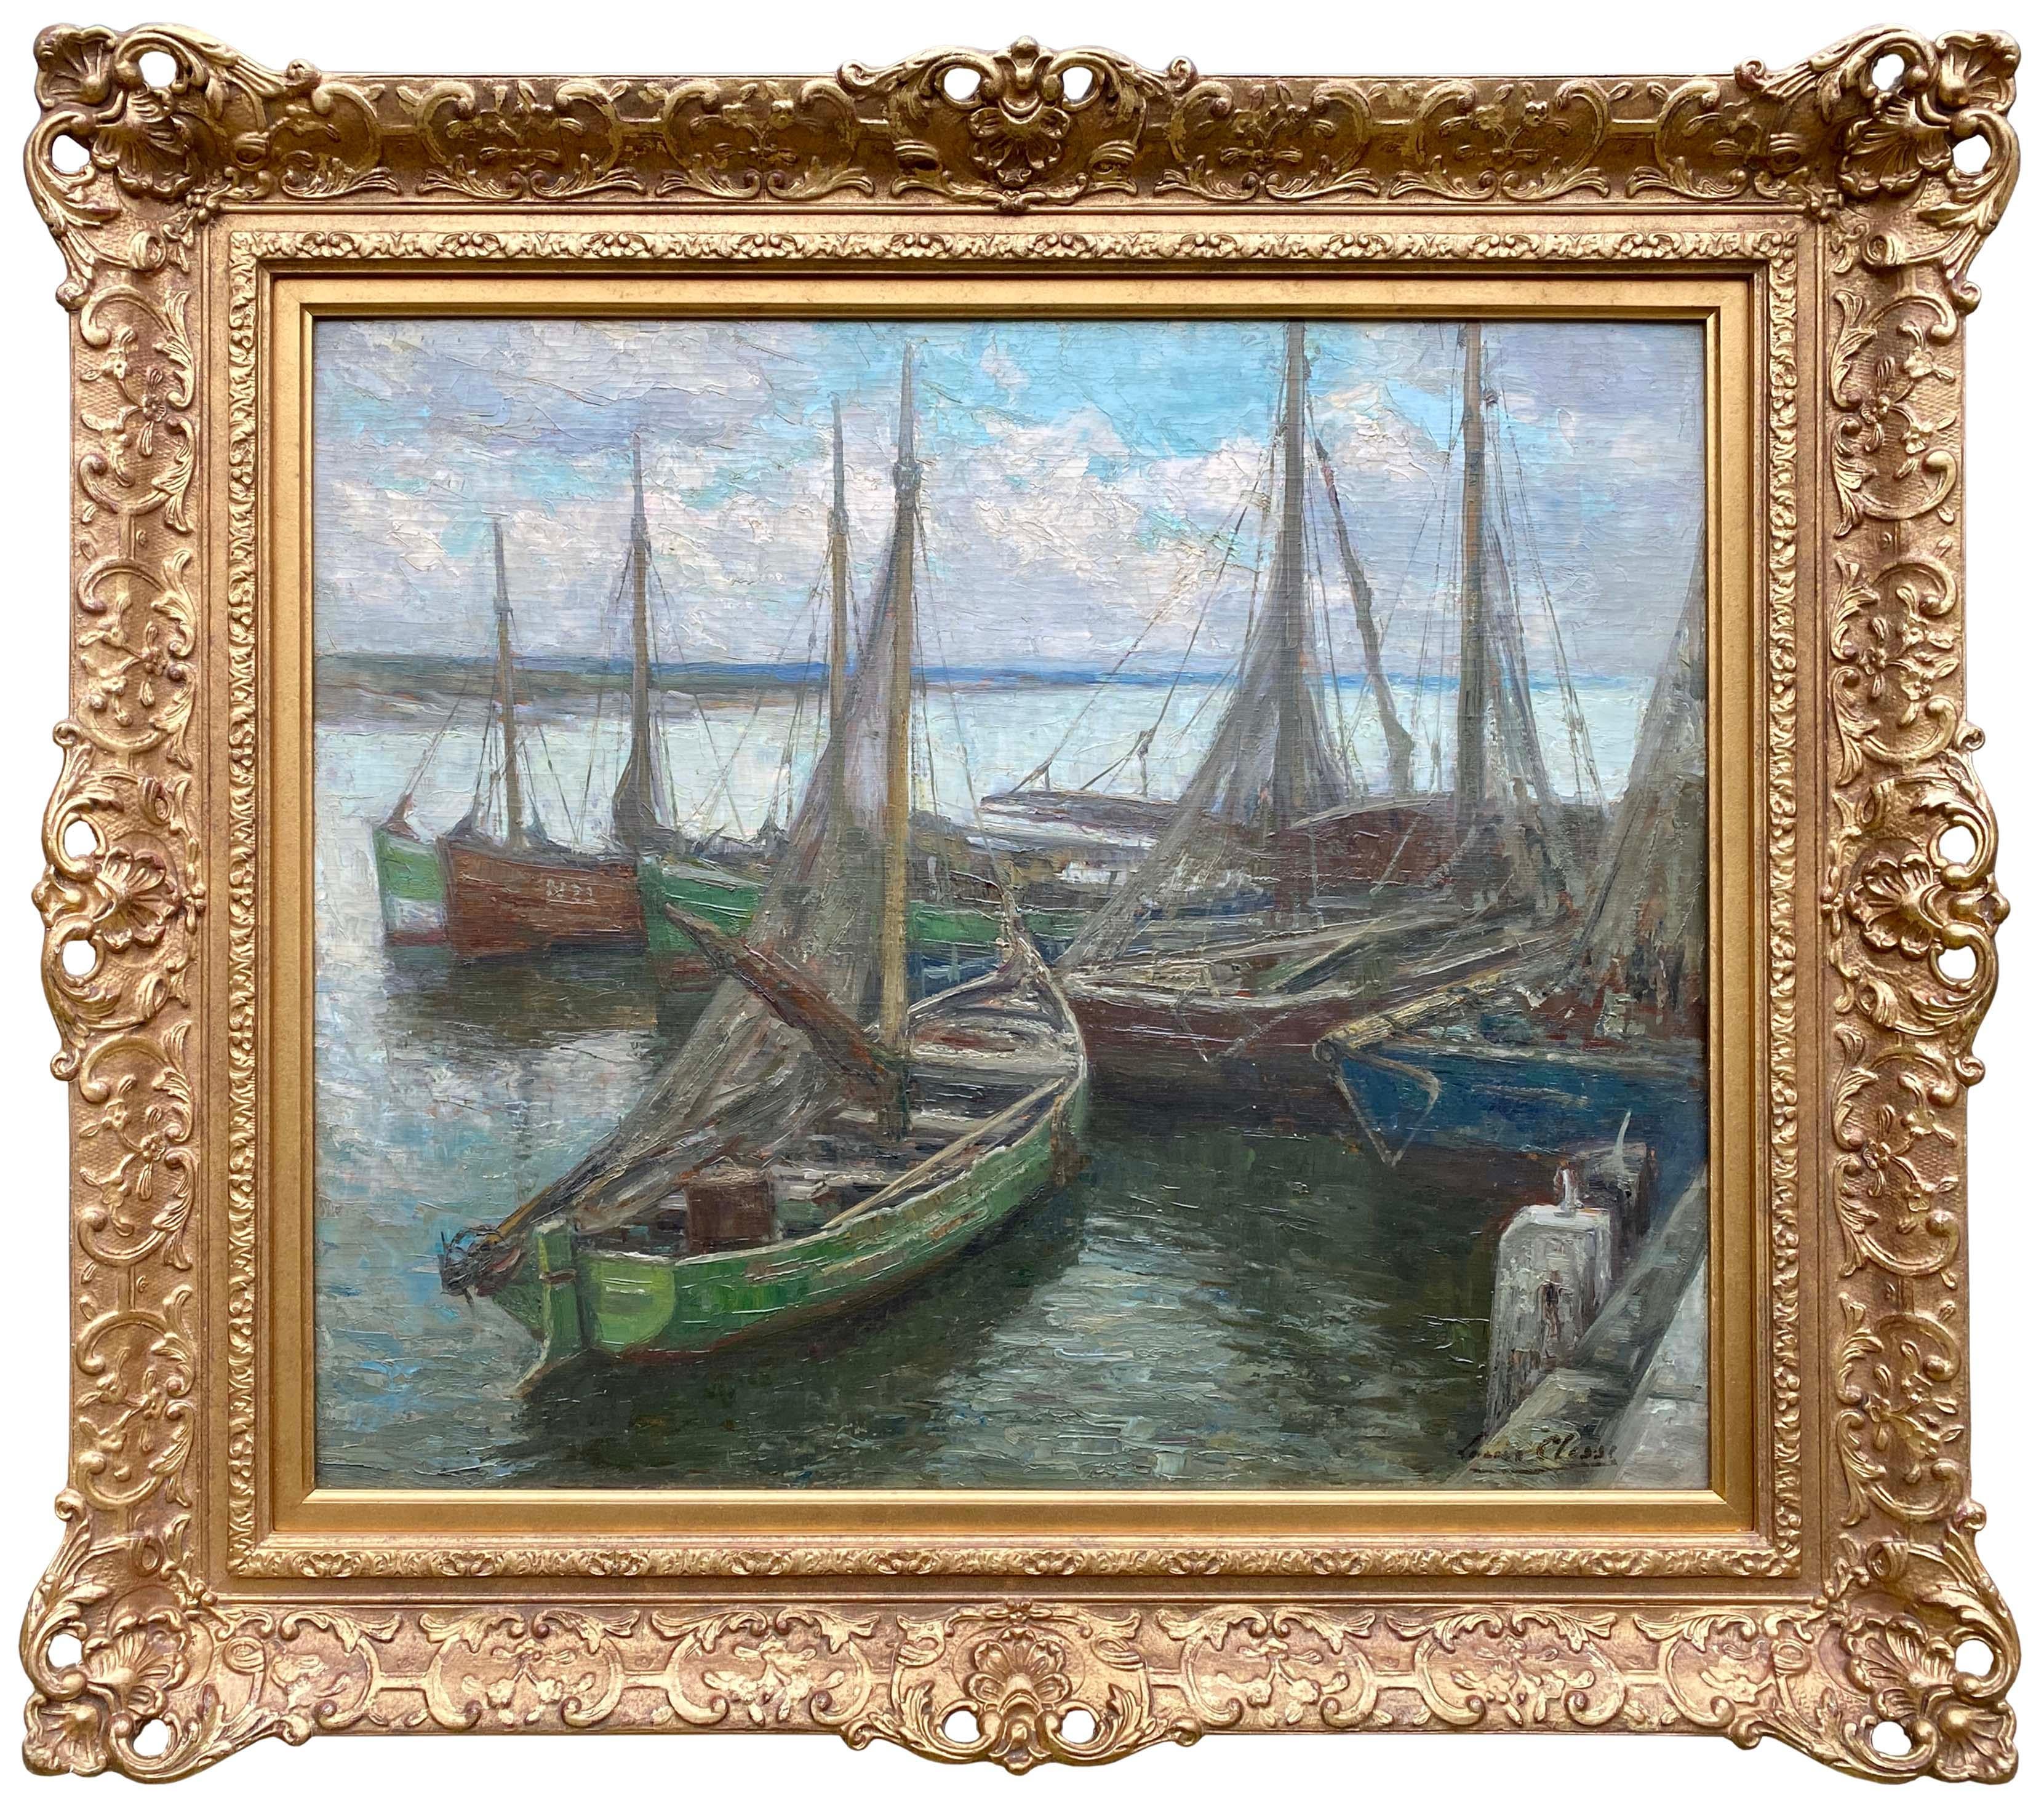 Boats at the Nieuwpoort Harbour, Louis Clesse, Brussels 1889 – 1961, Belgian